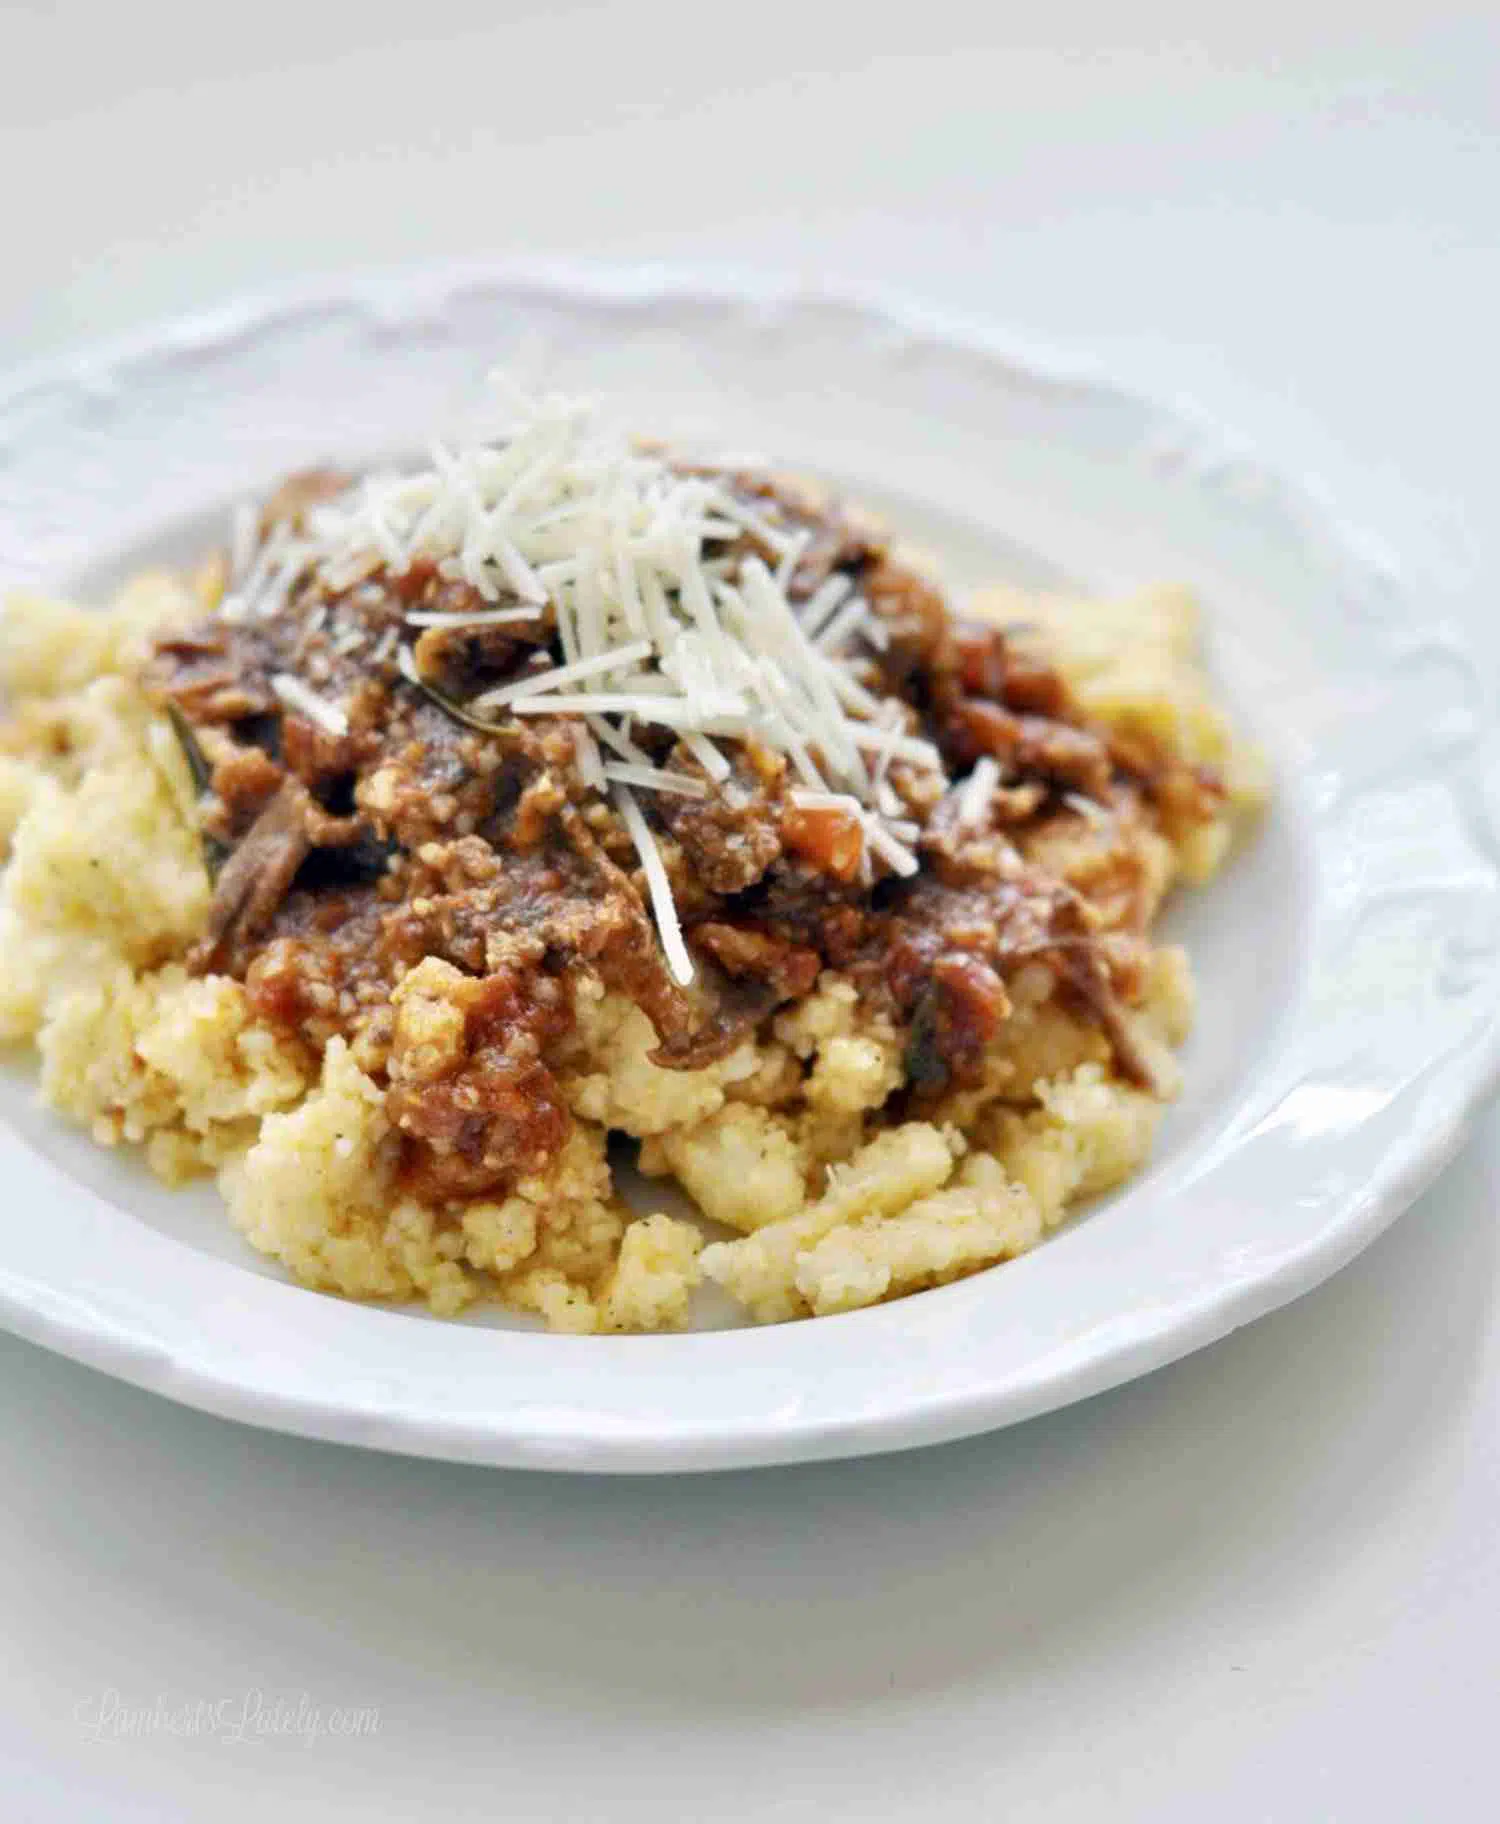 beef ragu over cheese grits, topped with shredded parmesan, on a white plate.